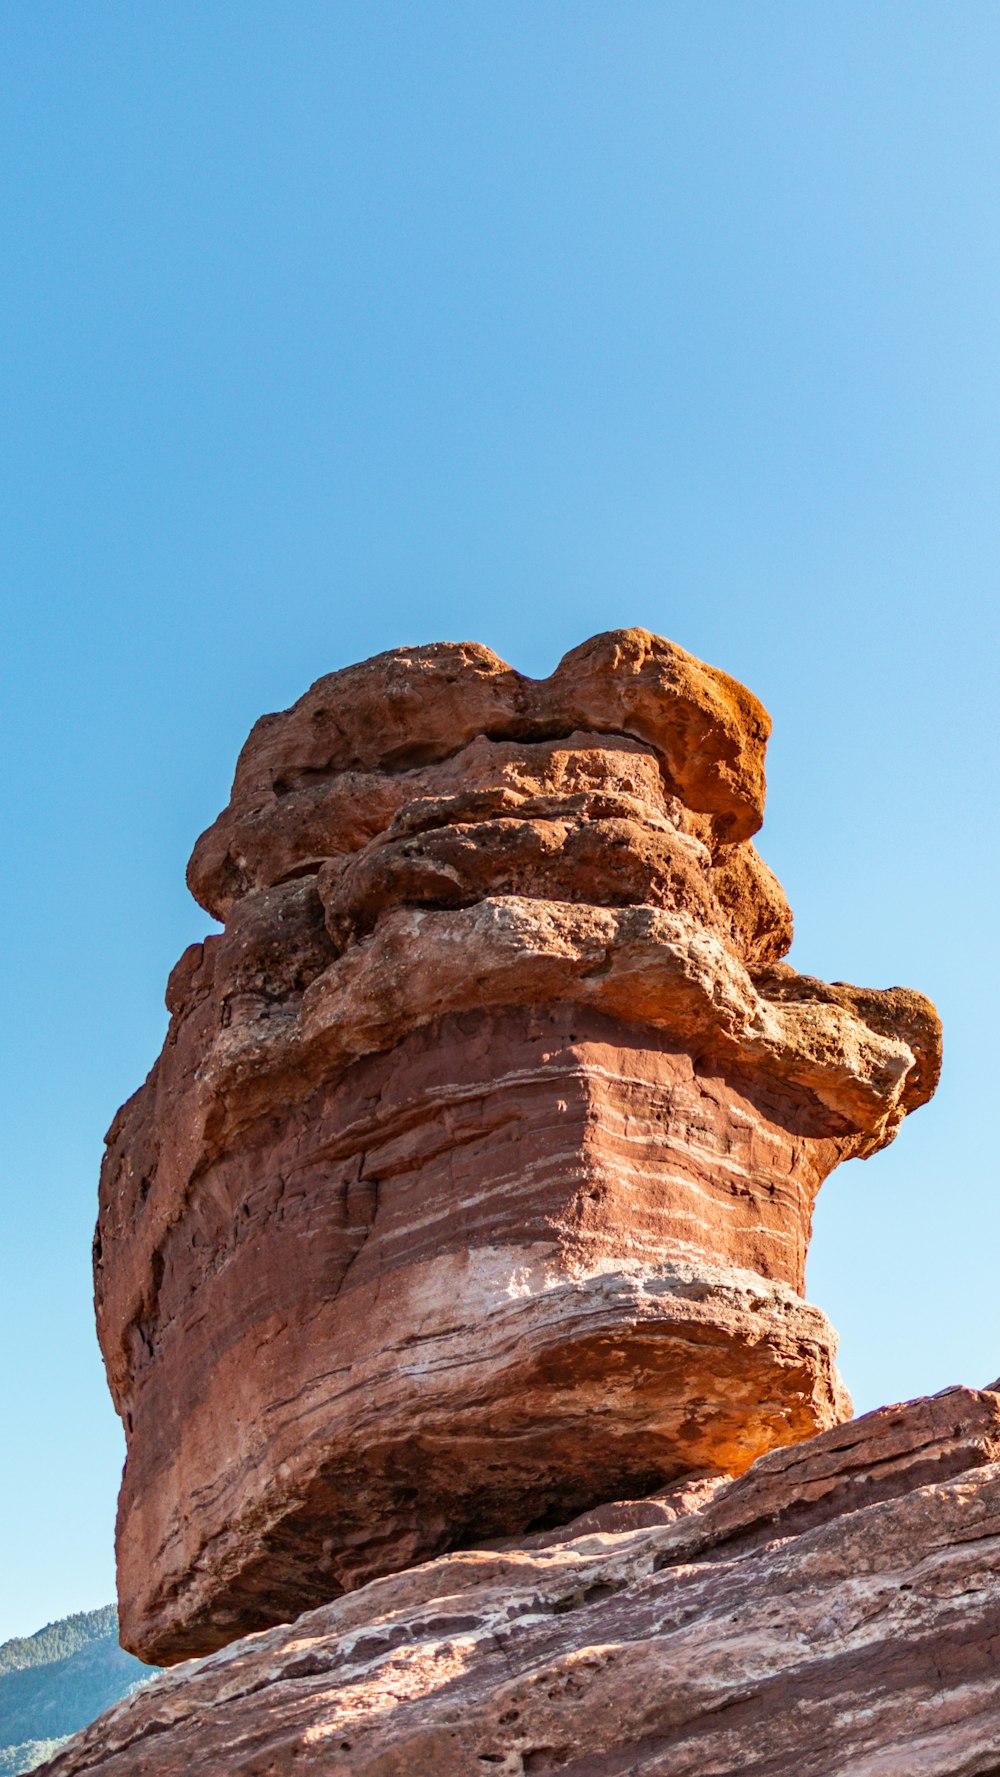 a rock formation in the desert against a blue sky